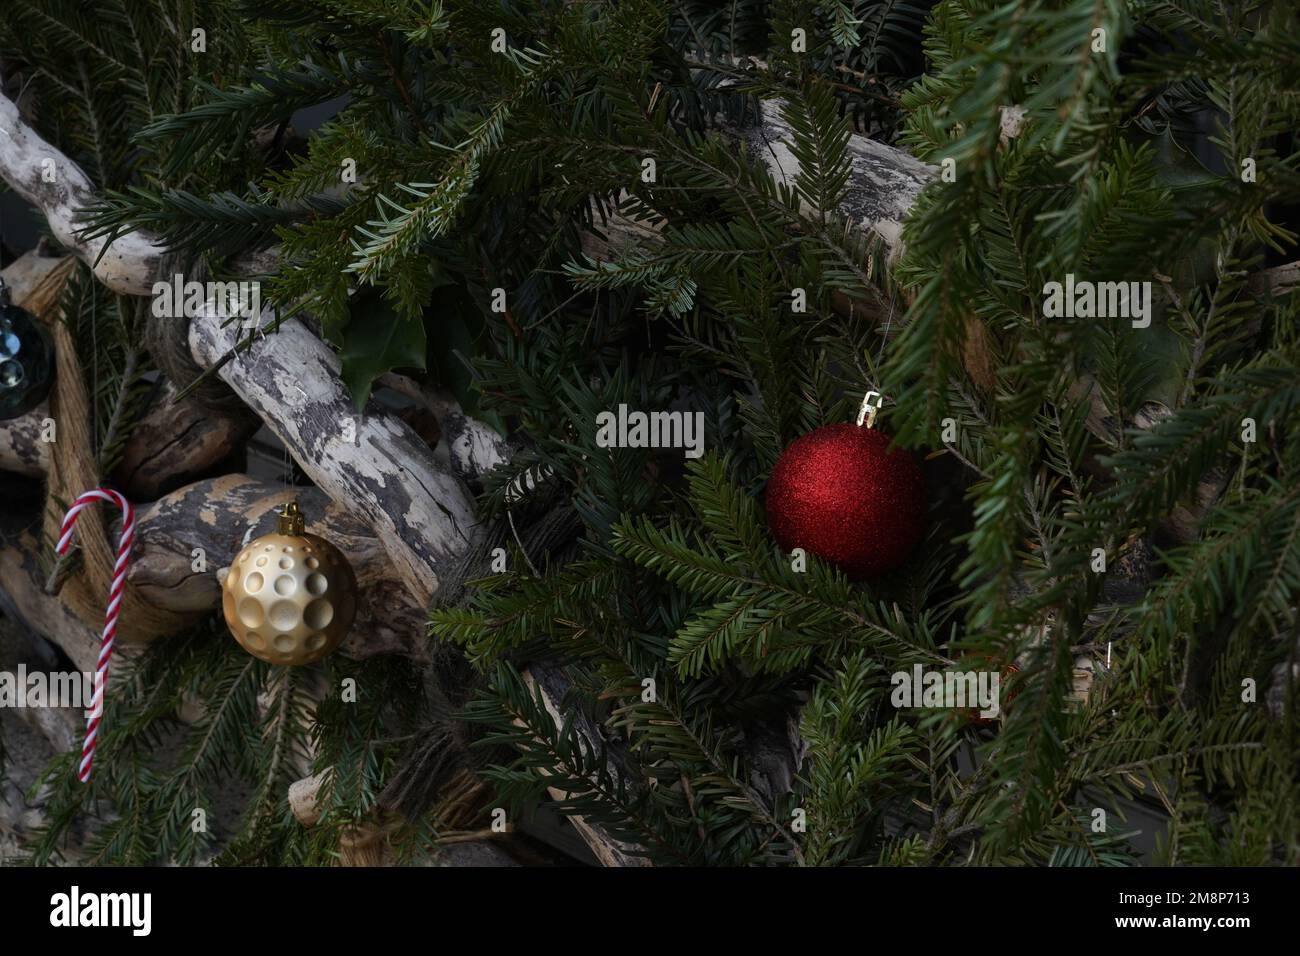 Christmas balls and Christmas candy cane decorations are arranged on coniferous twigs as outdoor seasonal decoration. Stock Photo